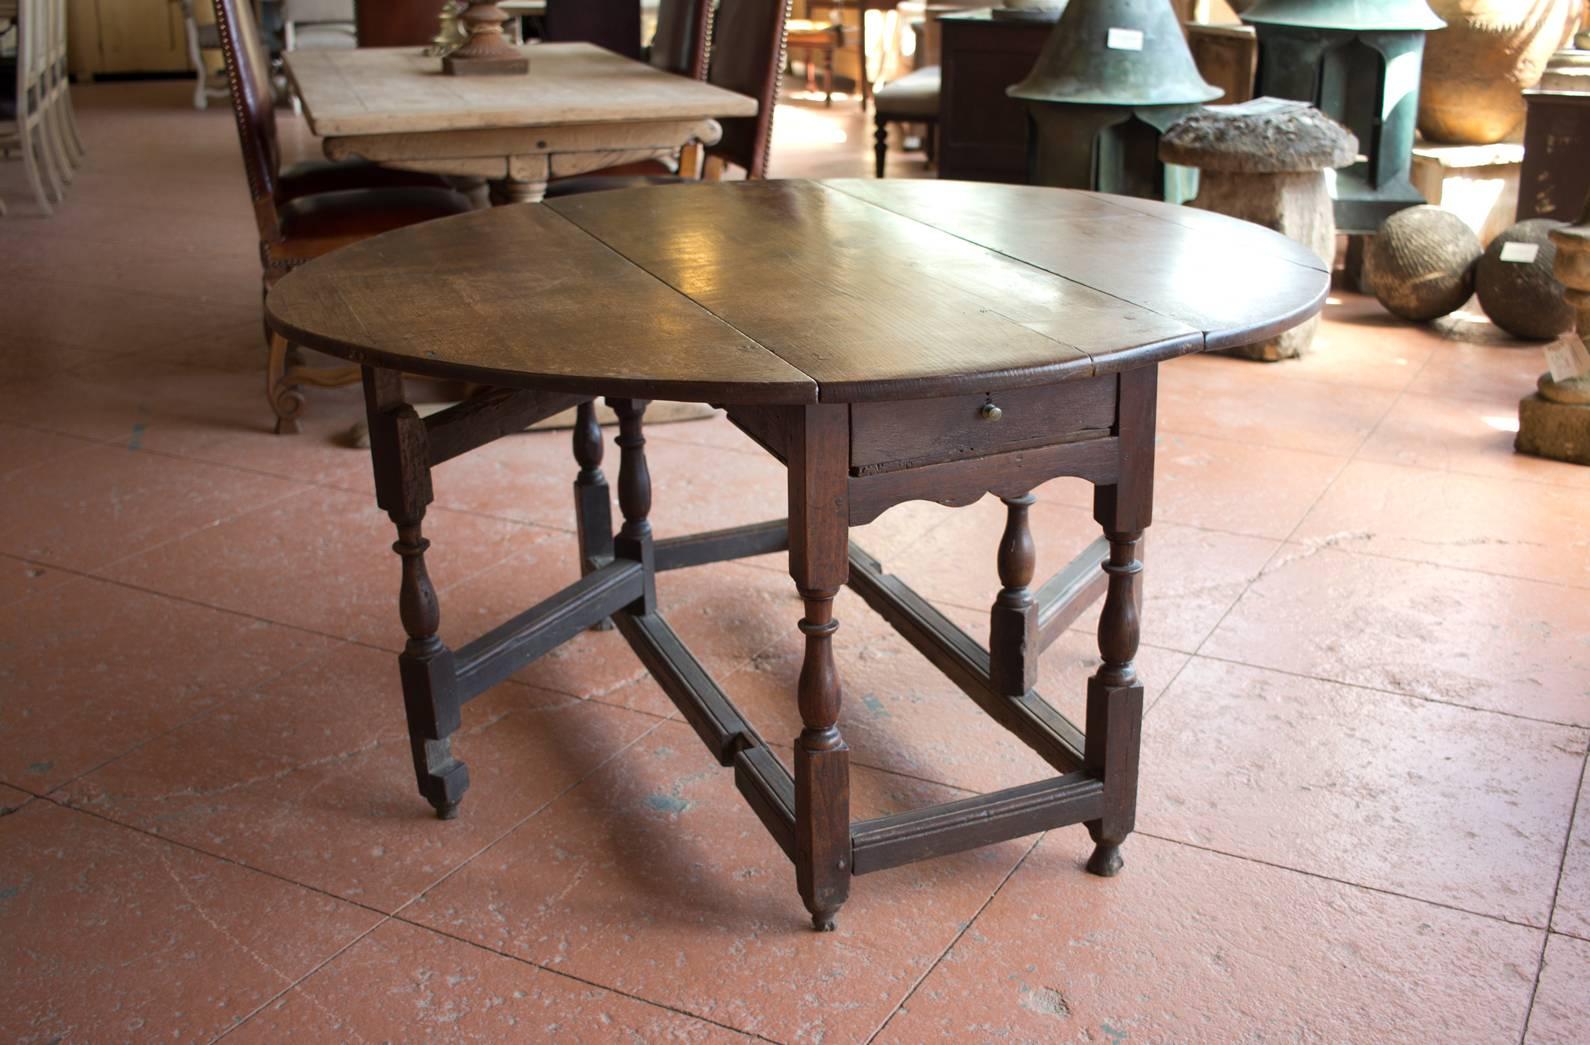 Wonderful late 1600s oak gate leg table with drawer to either end. Beautiful patina.